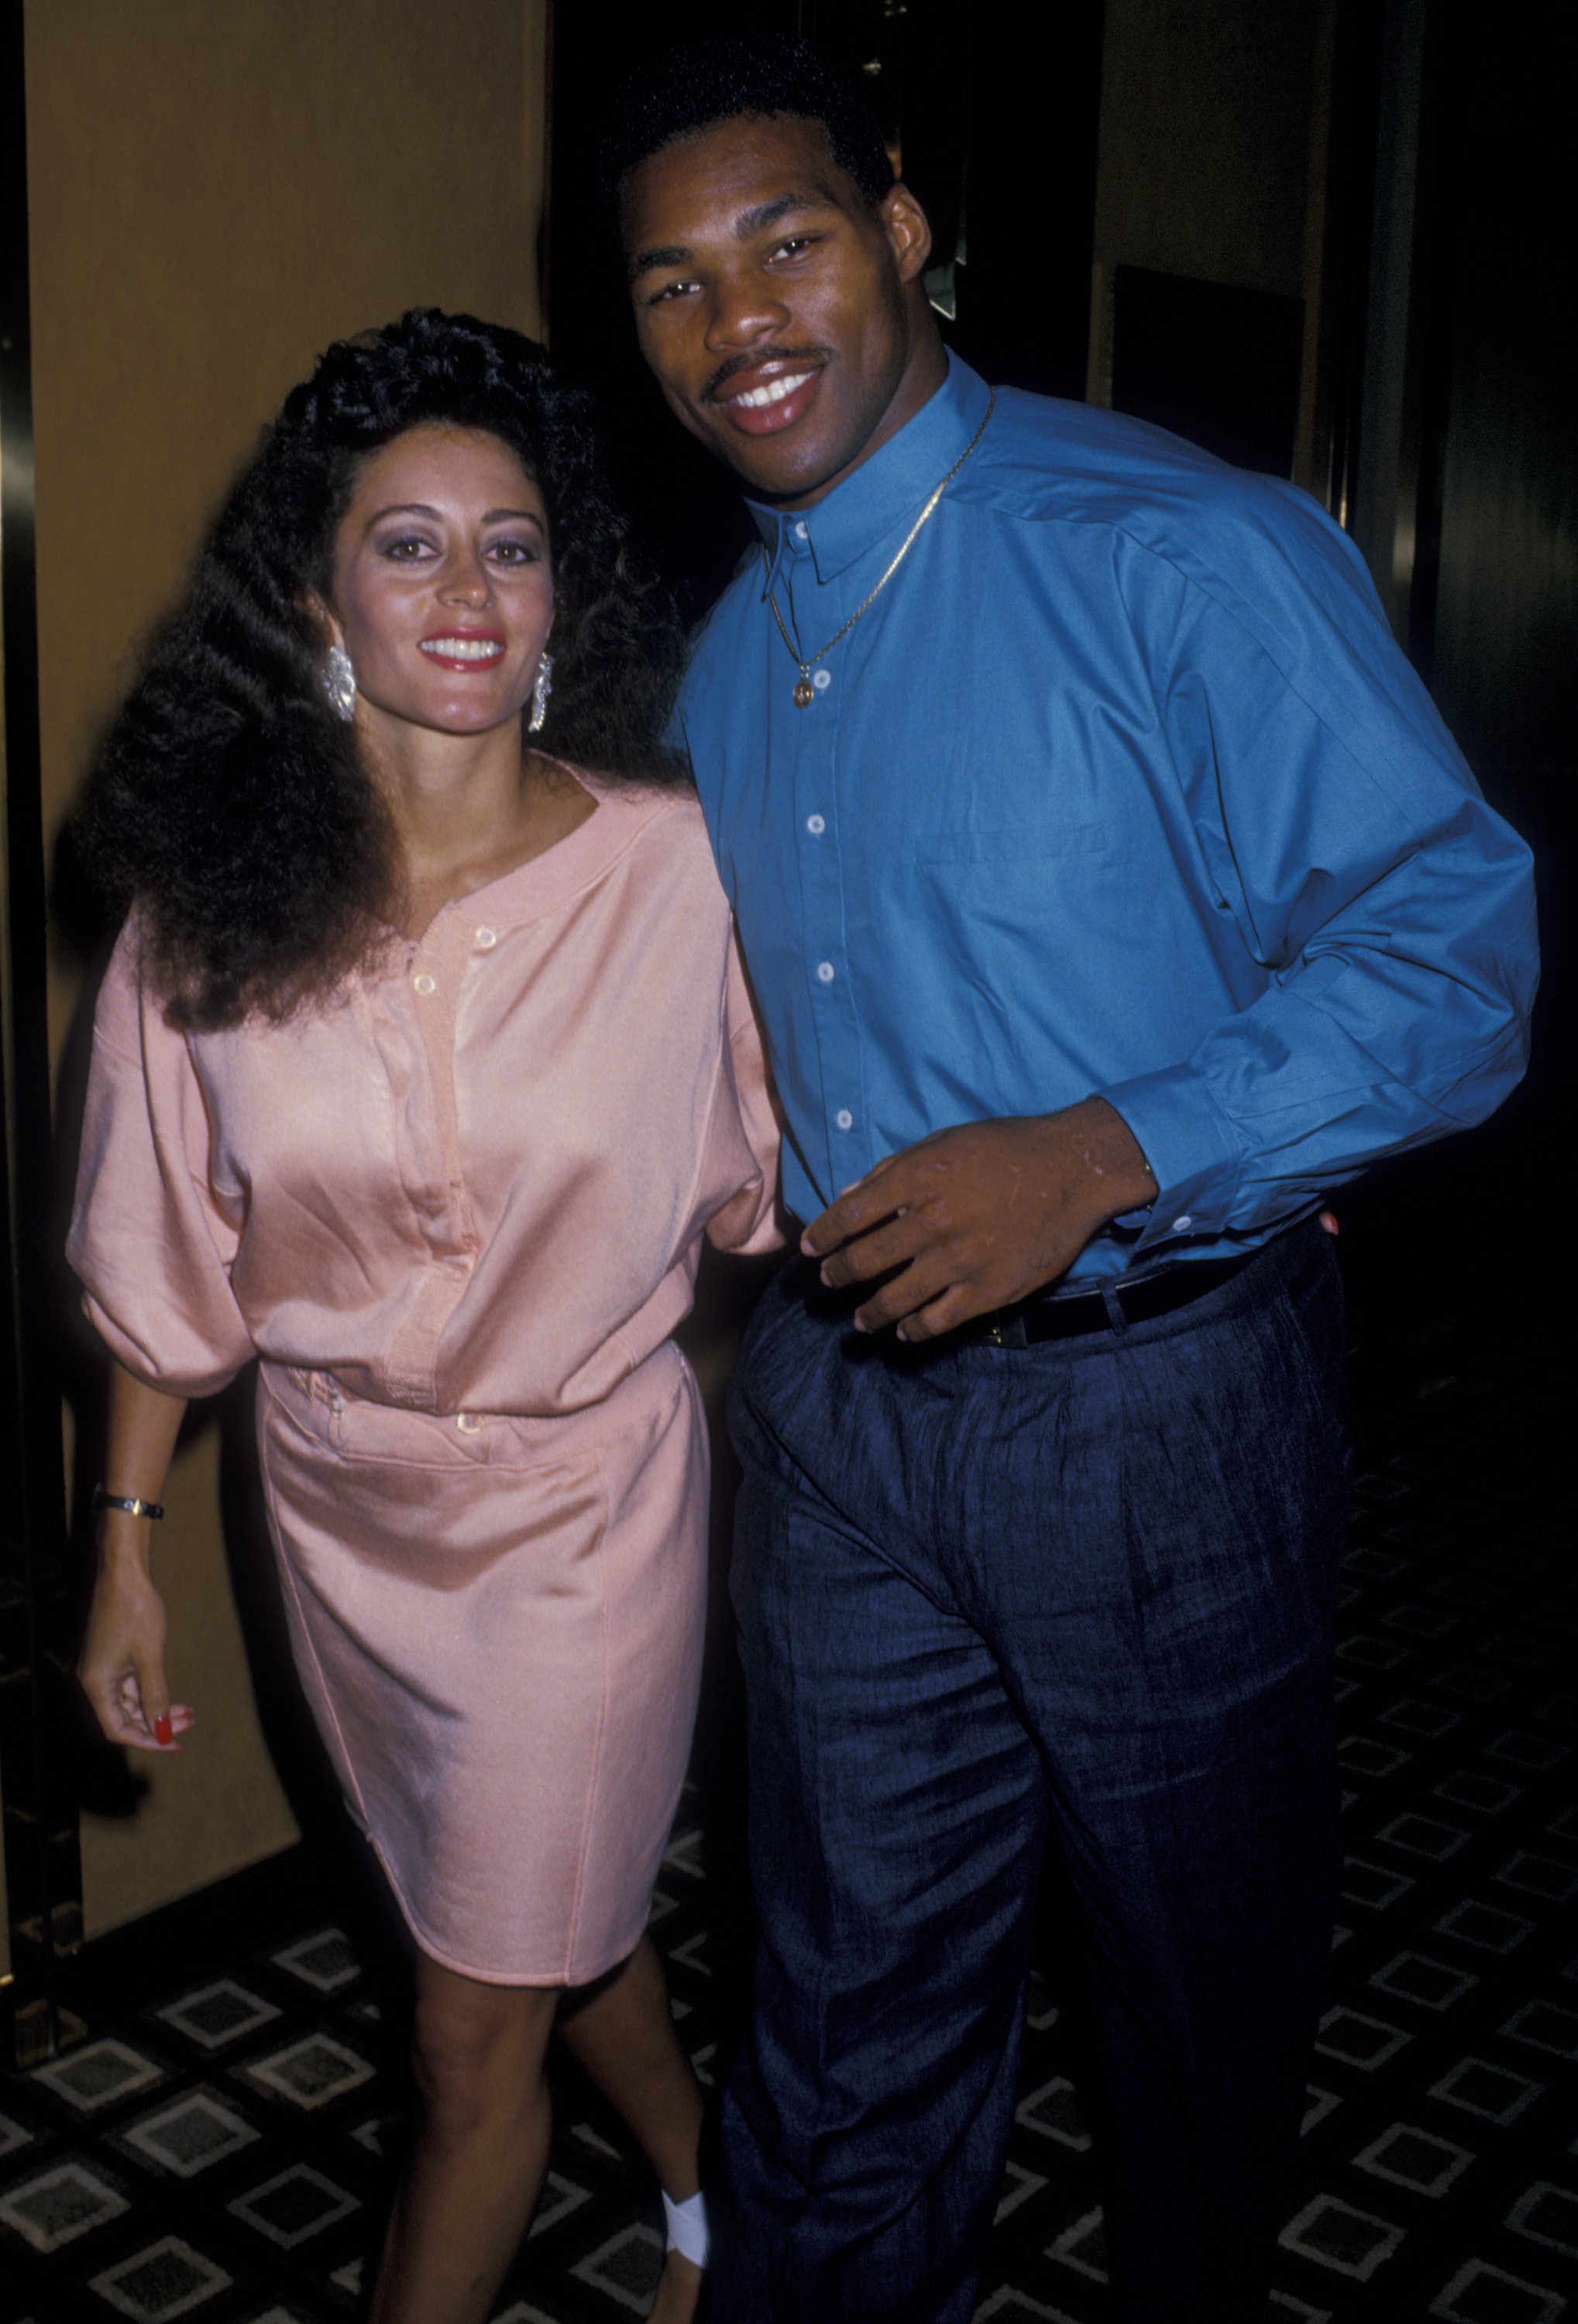 Herschel Walker, along with Cindy Deangelis Grossman, at the Tyson vs. Spinks Boxing Match on June 27, 1988, in New Jersey. | Source: Getty Images